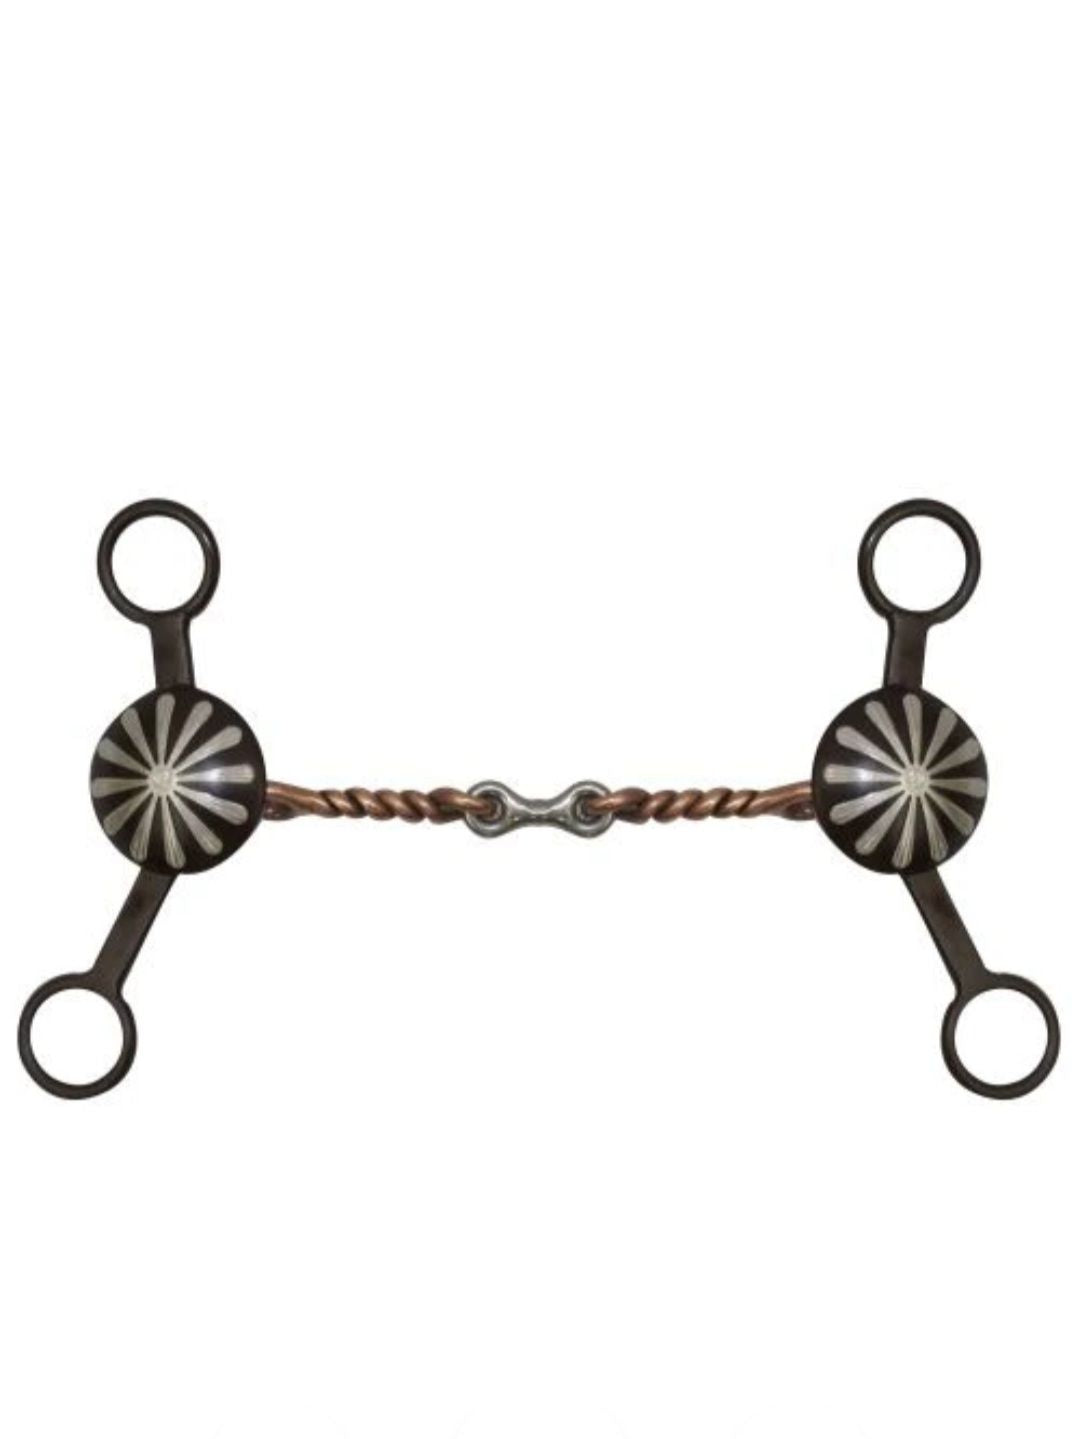 Bits - 5" Brown Steel Concho Bit with Dogbone Mouth